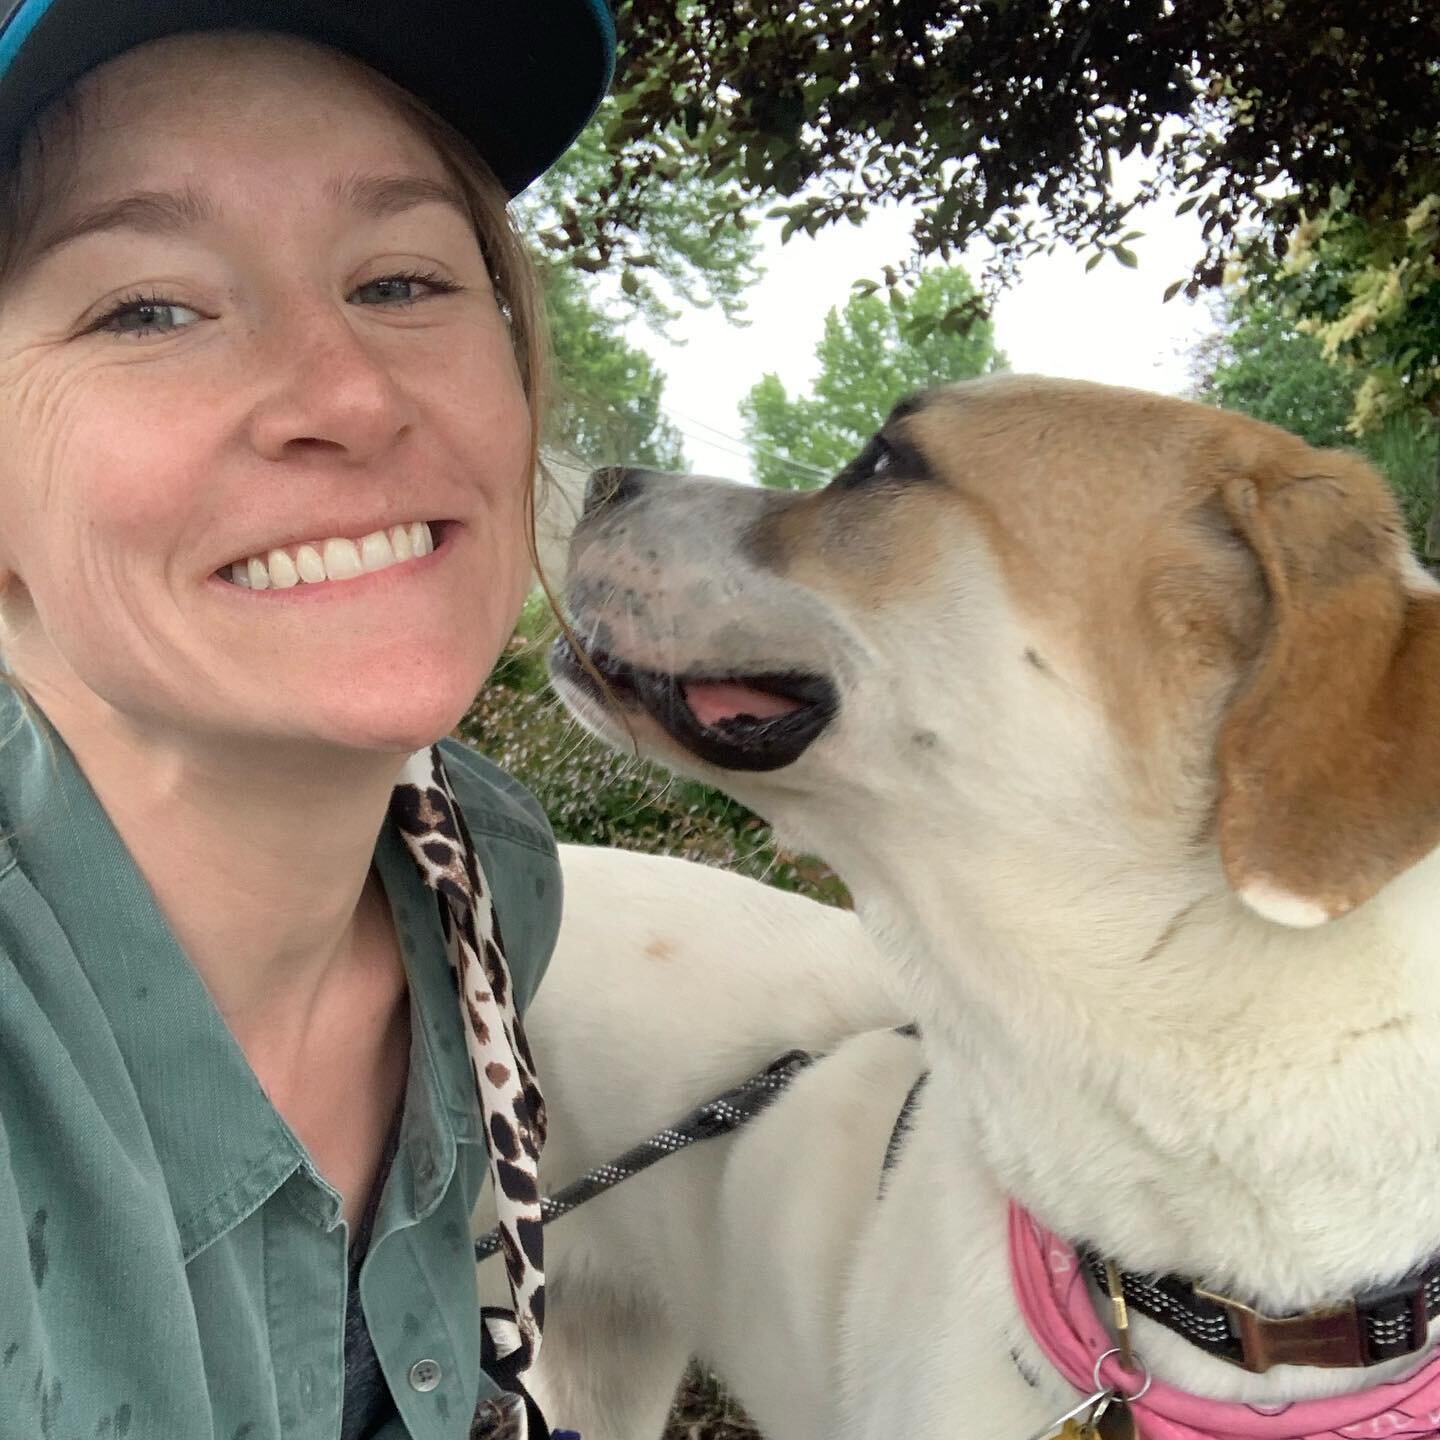 Puppy kisses. To someone with OCD, a puppy kiss can trigger a wave of intense discomfort as fear dominates the brain. This week, I accepted many puppy kisses. Willingly. And my goooooooodness. I&rsquo;m so thankful for my #meditation practice. 

#ocd